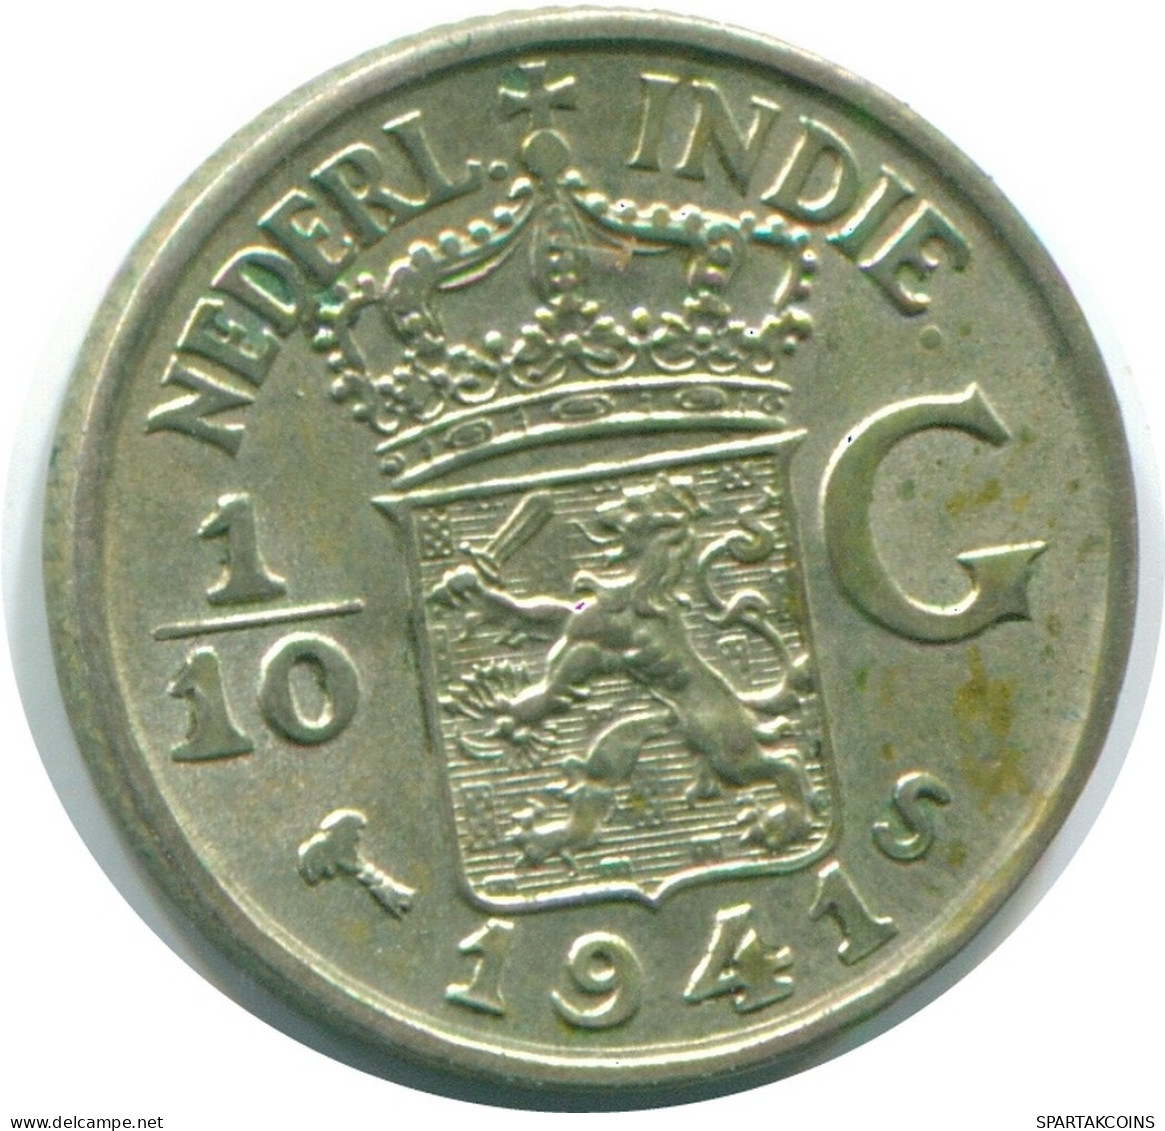 1/10 GULDEN 1941 S NETHERLANDS EAST INDIES SILVER Colonial Coin #NL13818.3.U.A - Indie Olandesi